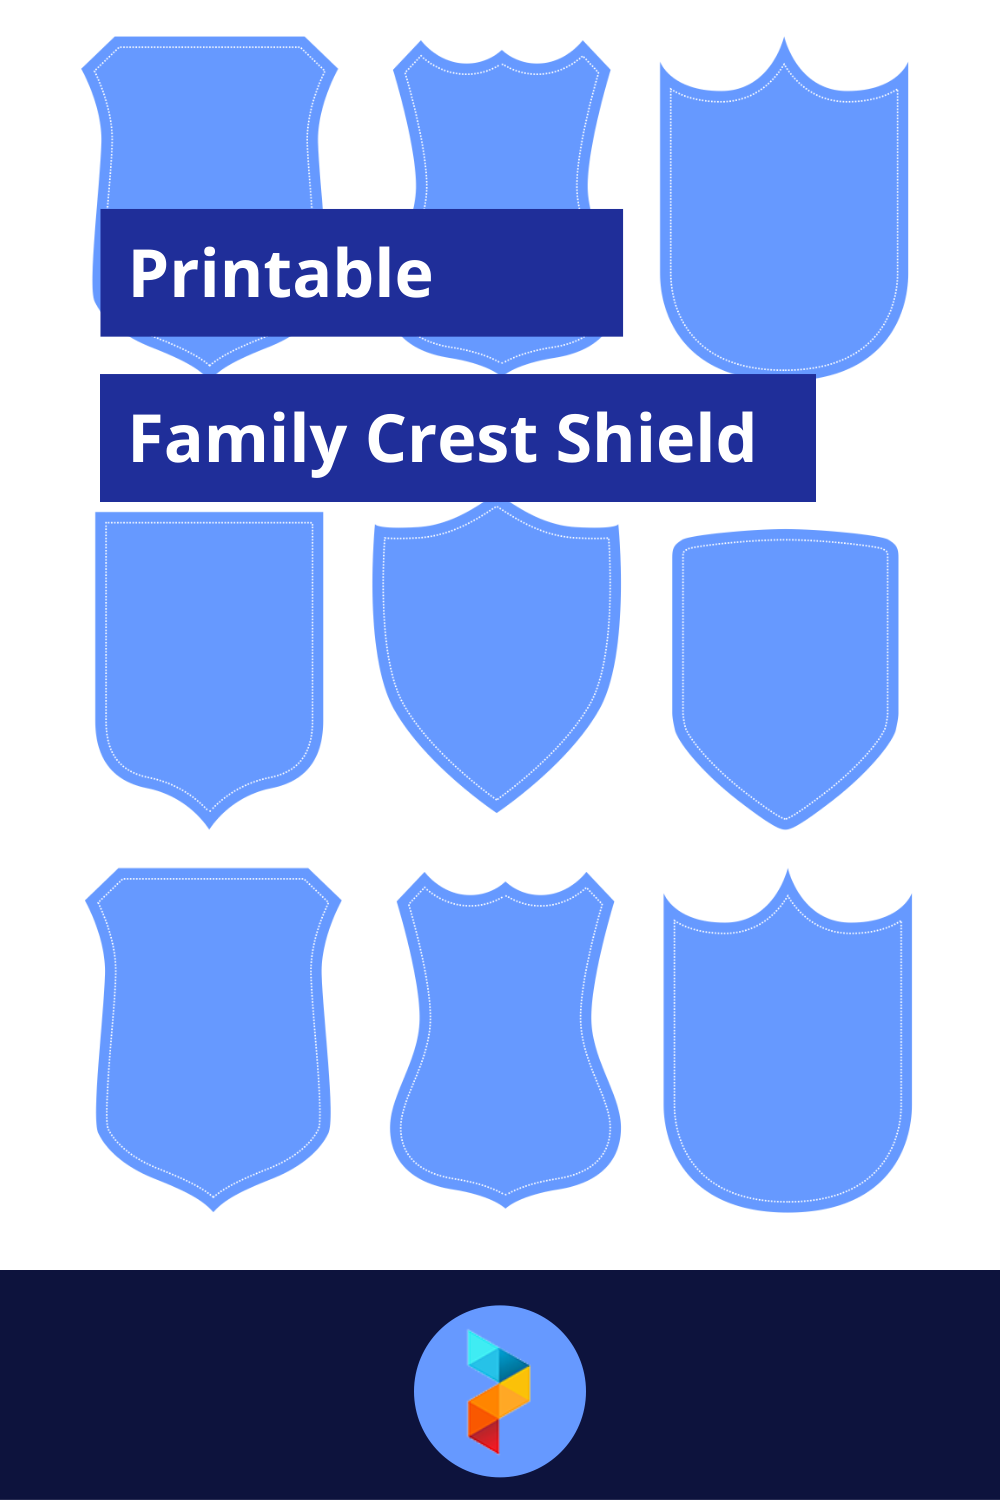 Printable Family Crest Shield